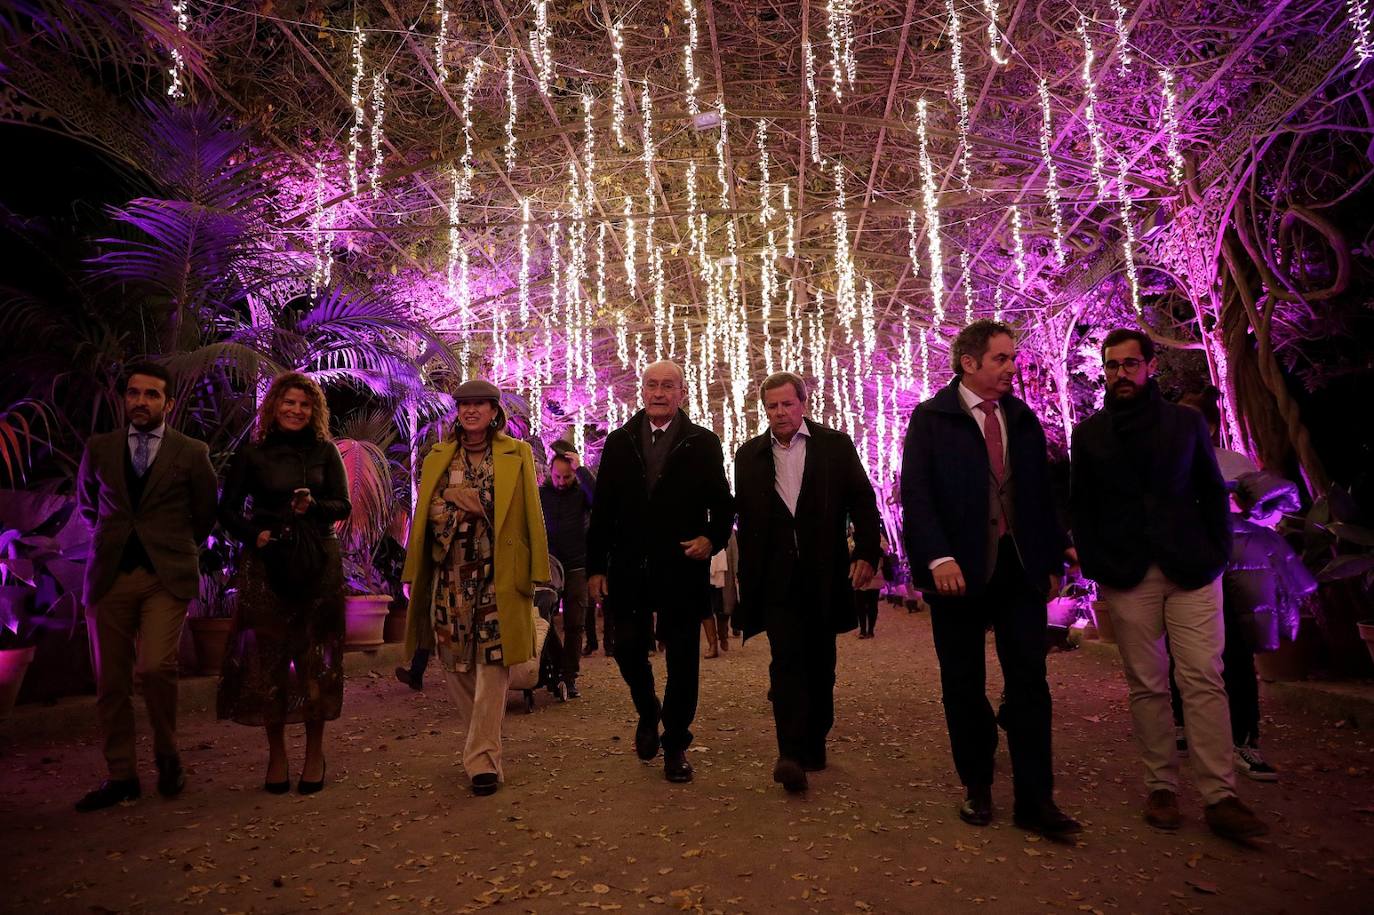 The Journey of the Star from the East, the new festive spectacular at Malaga's La Concepción botanical garden, can be visited until 8 January 2023.